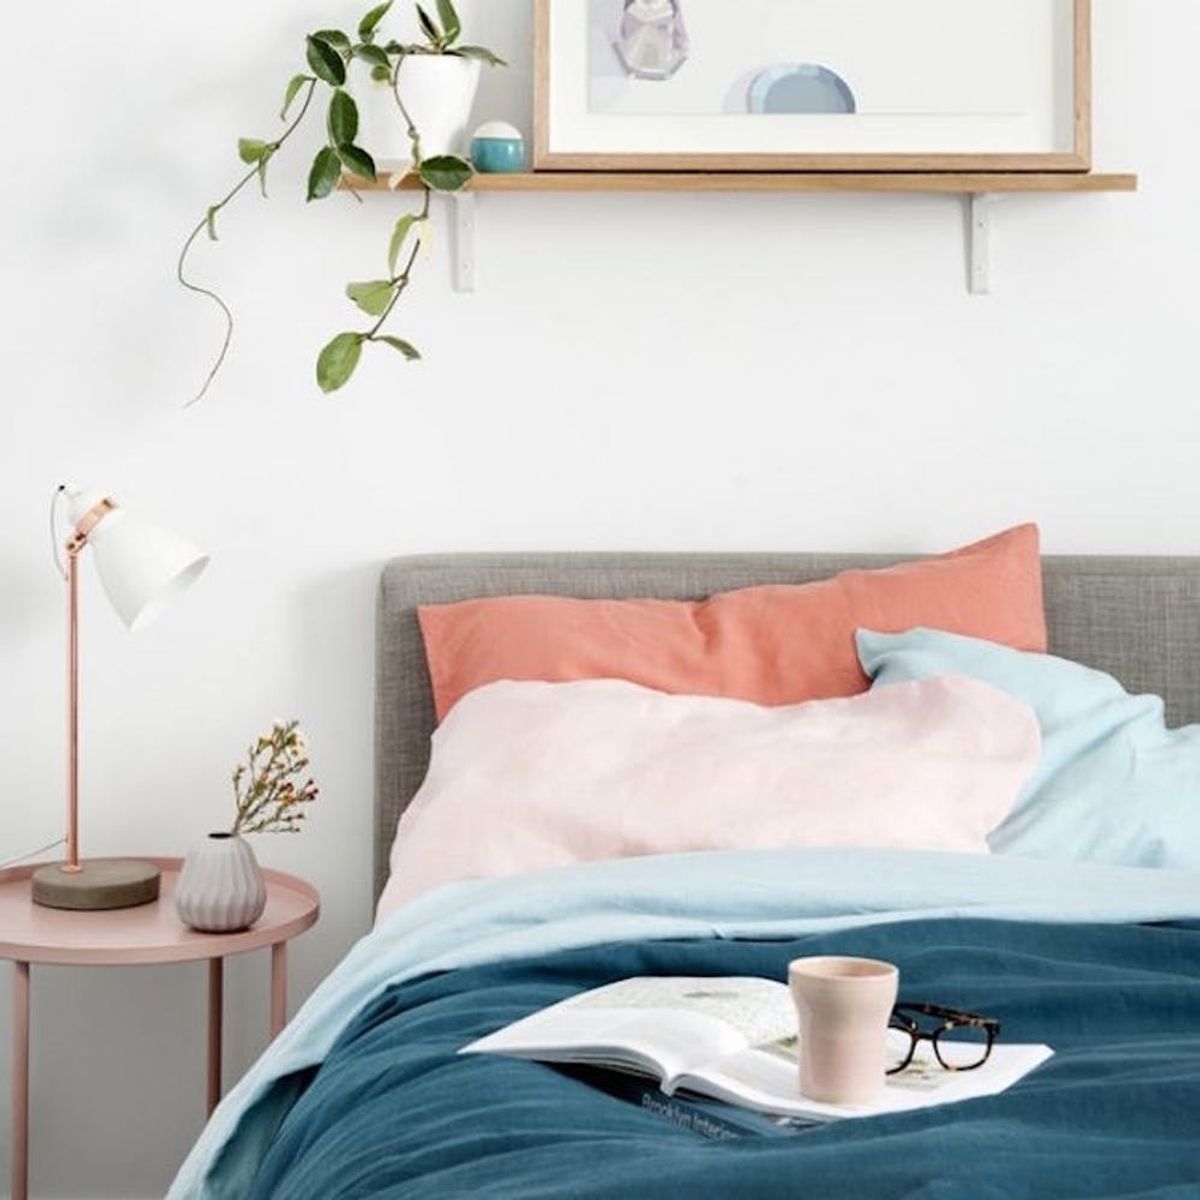 How to Incorporate the “At Ease” Pantone Color Palette into Your Home